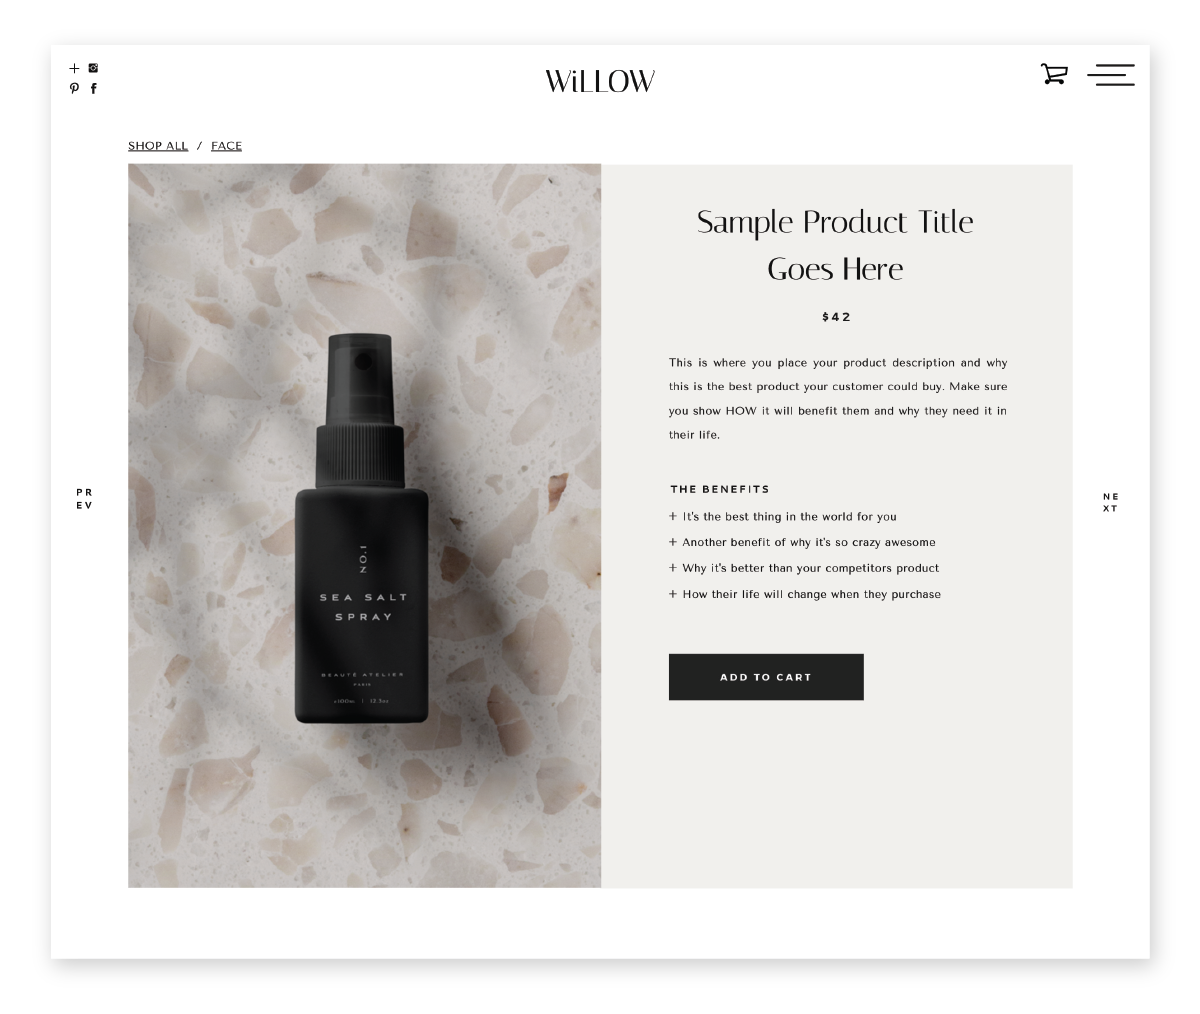 How to add a Shop to your Showit Website using Shopify Buy Buttons. Showit Website template, shop template, buy-buttons, showit, stylish template, how to shop, saffronavenue, website templates, website theme, easy to edit website, custom website. 